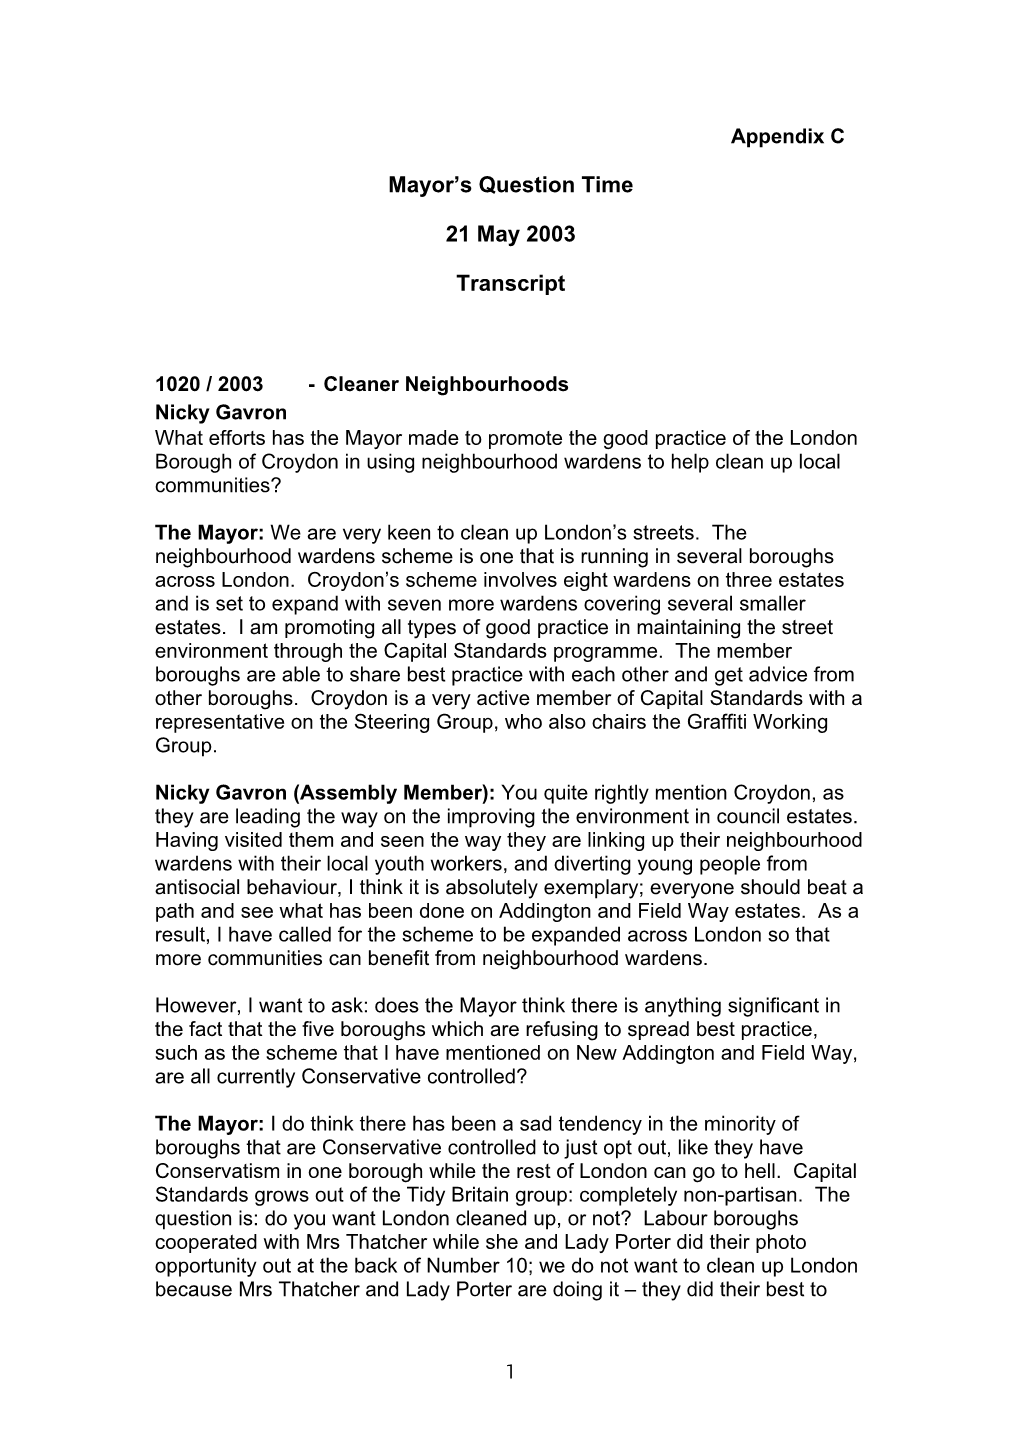 Mayor's Question Time 21 May 2003 Transcript